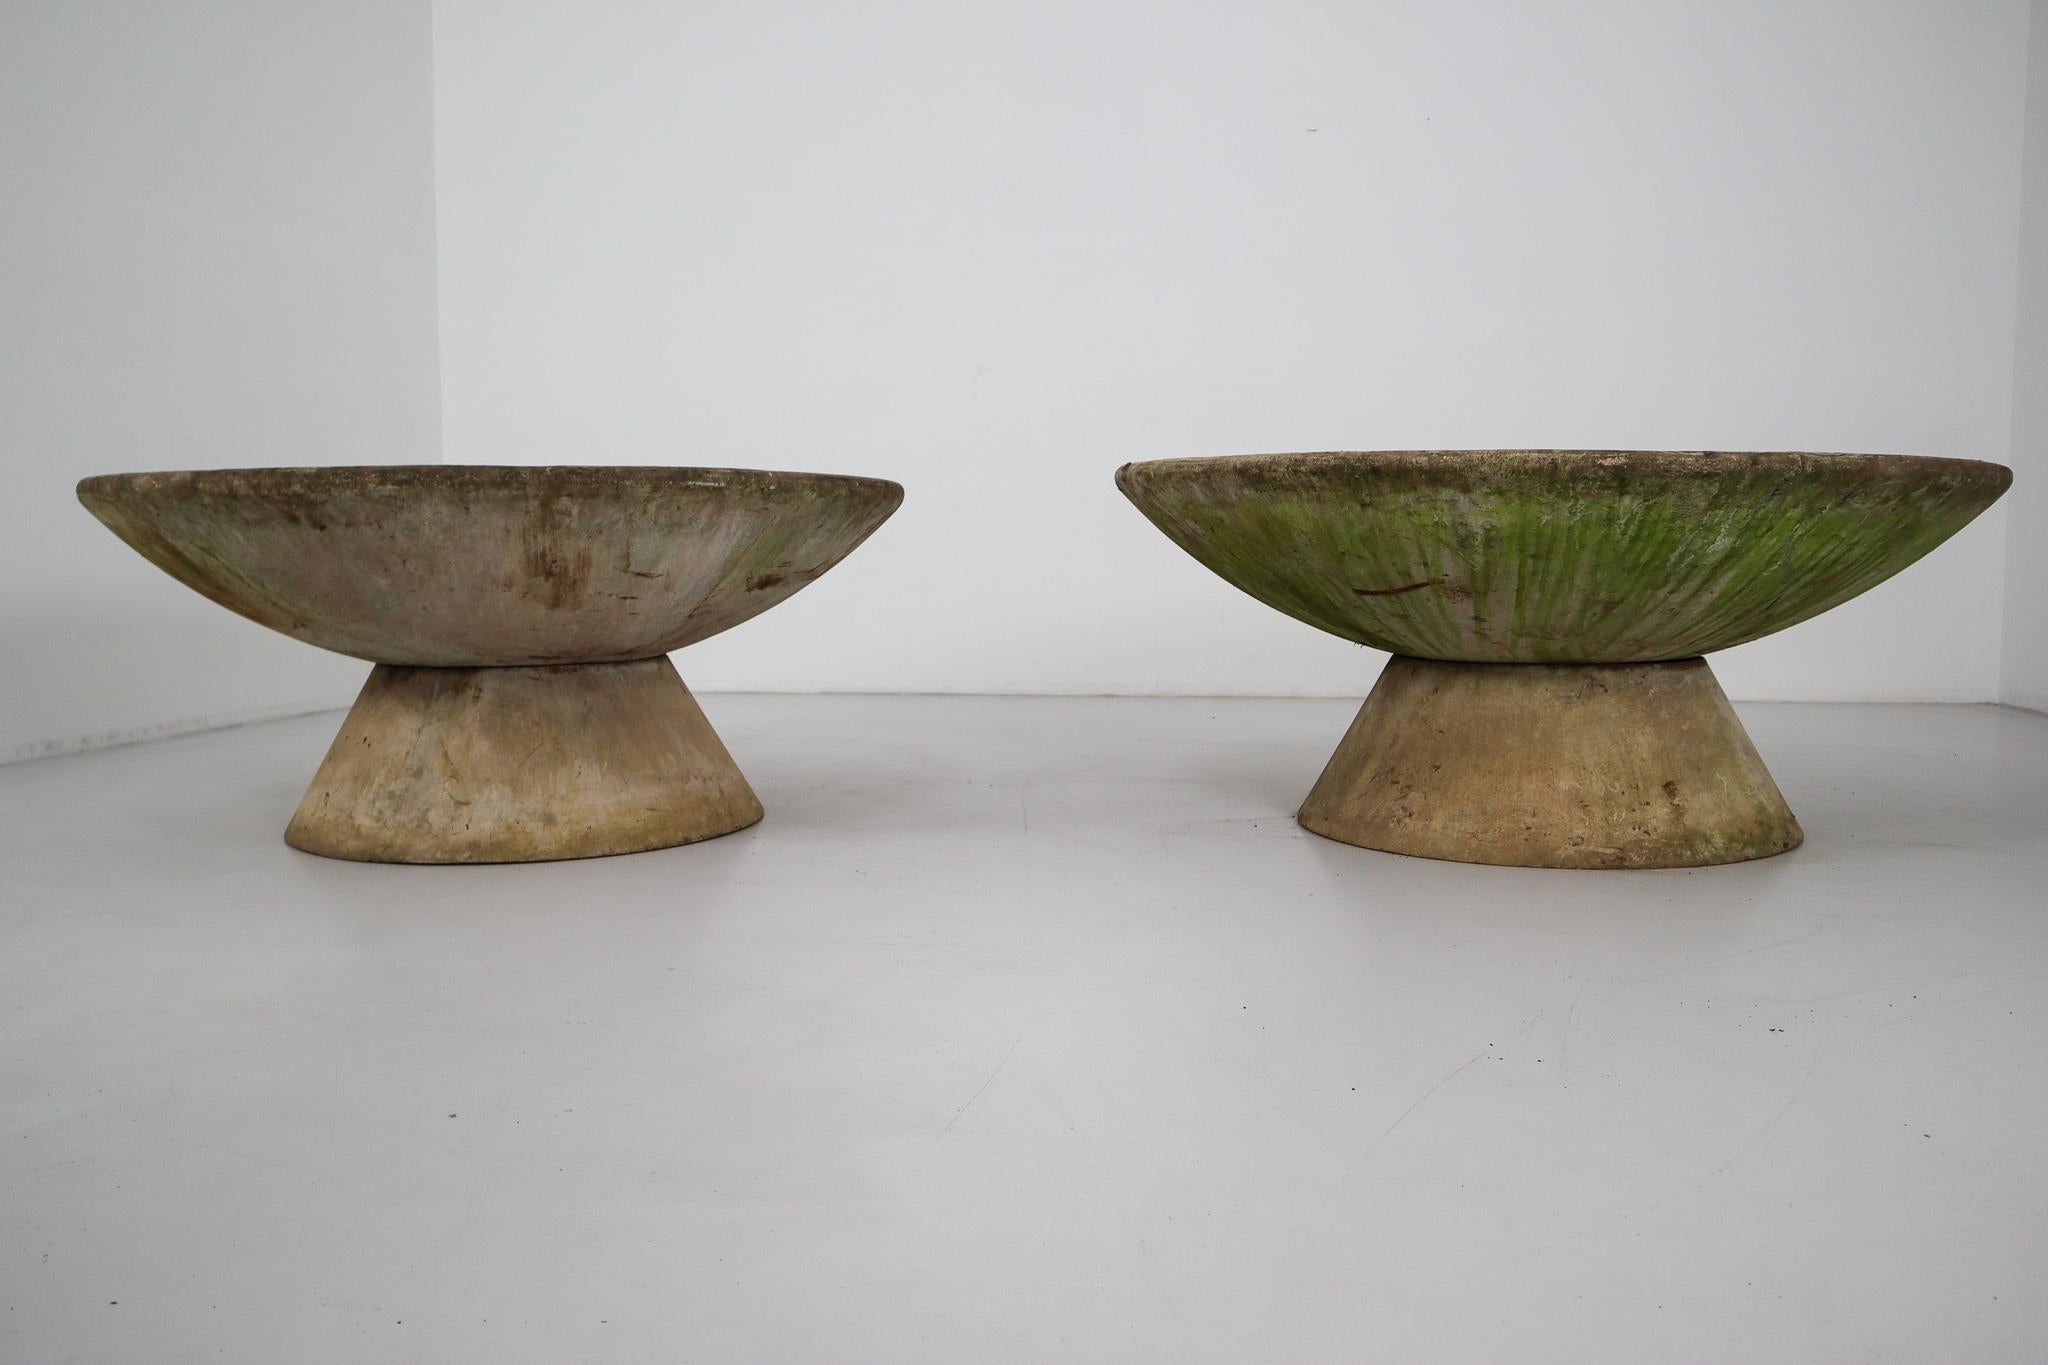 A fine pair of very large Mid-Century Modern large saucer planters of composition stone for an indoor or outdoor garden, garden room, or terrace. Each large round or circular discus resting on a smaller raised support.